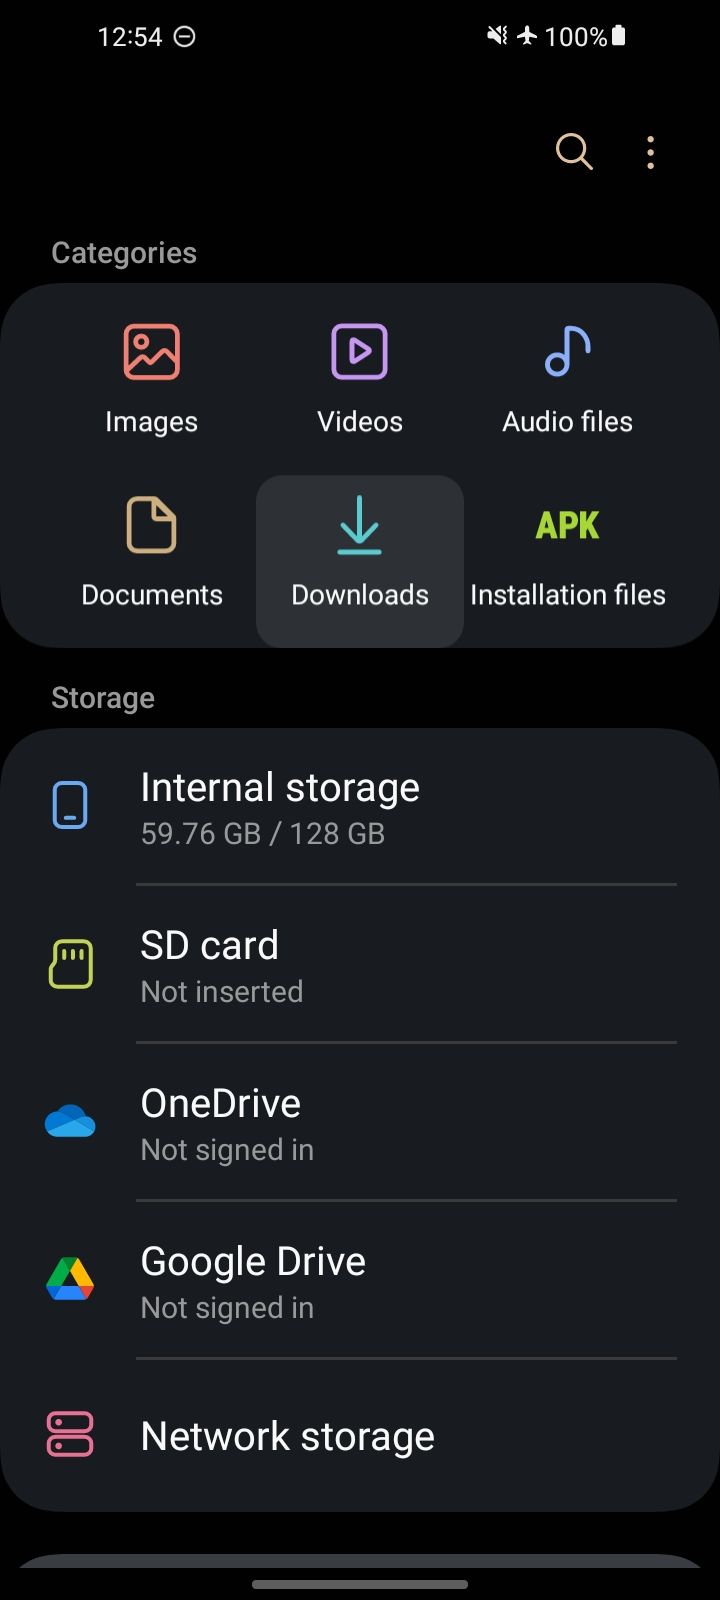 Samsung My Files app on Android highlighting the Downloads section